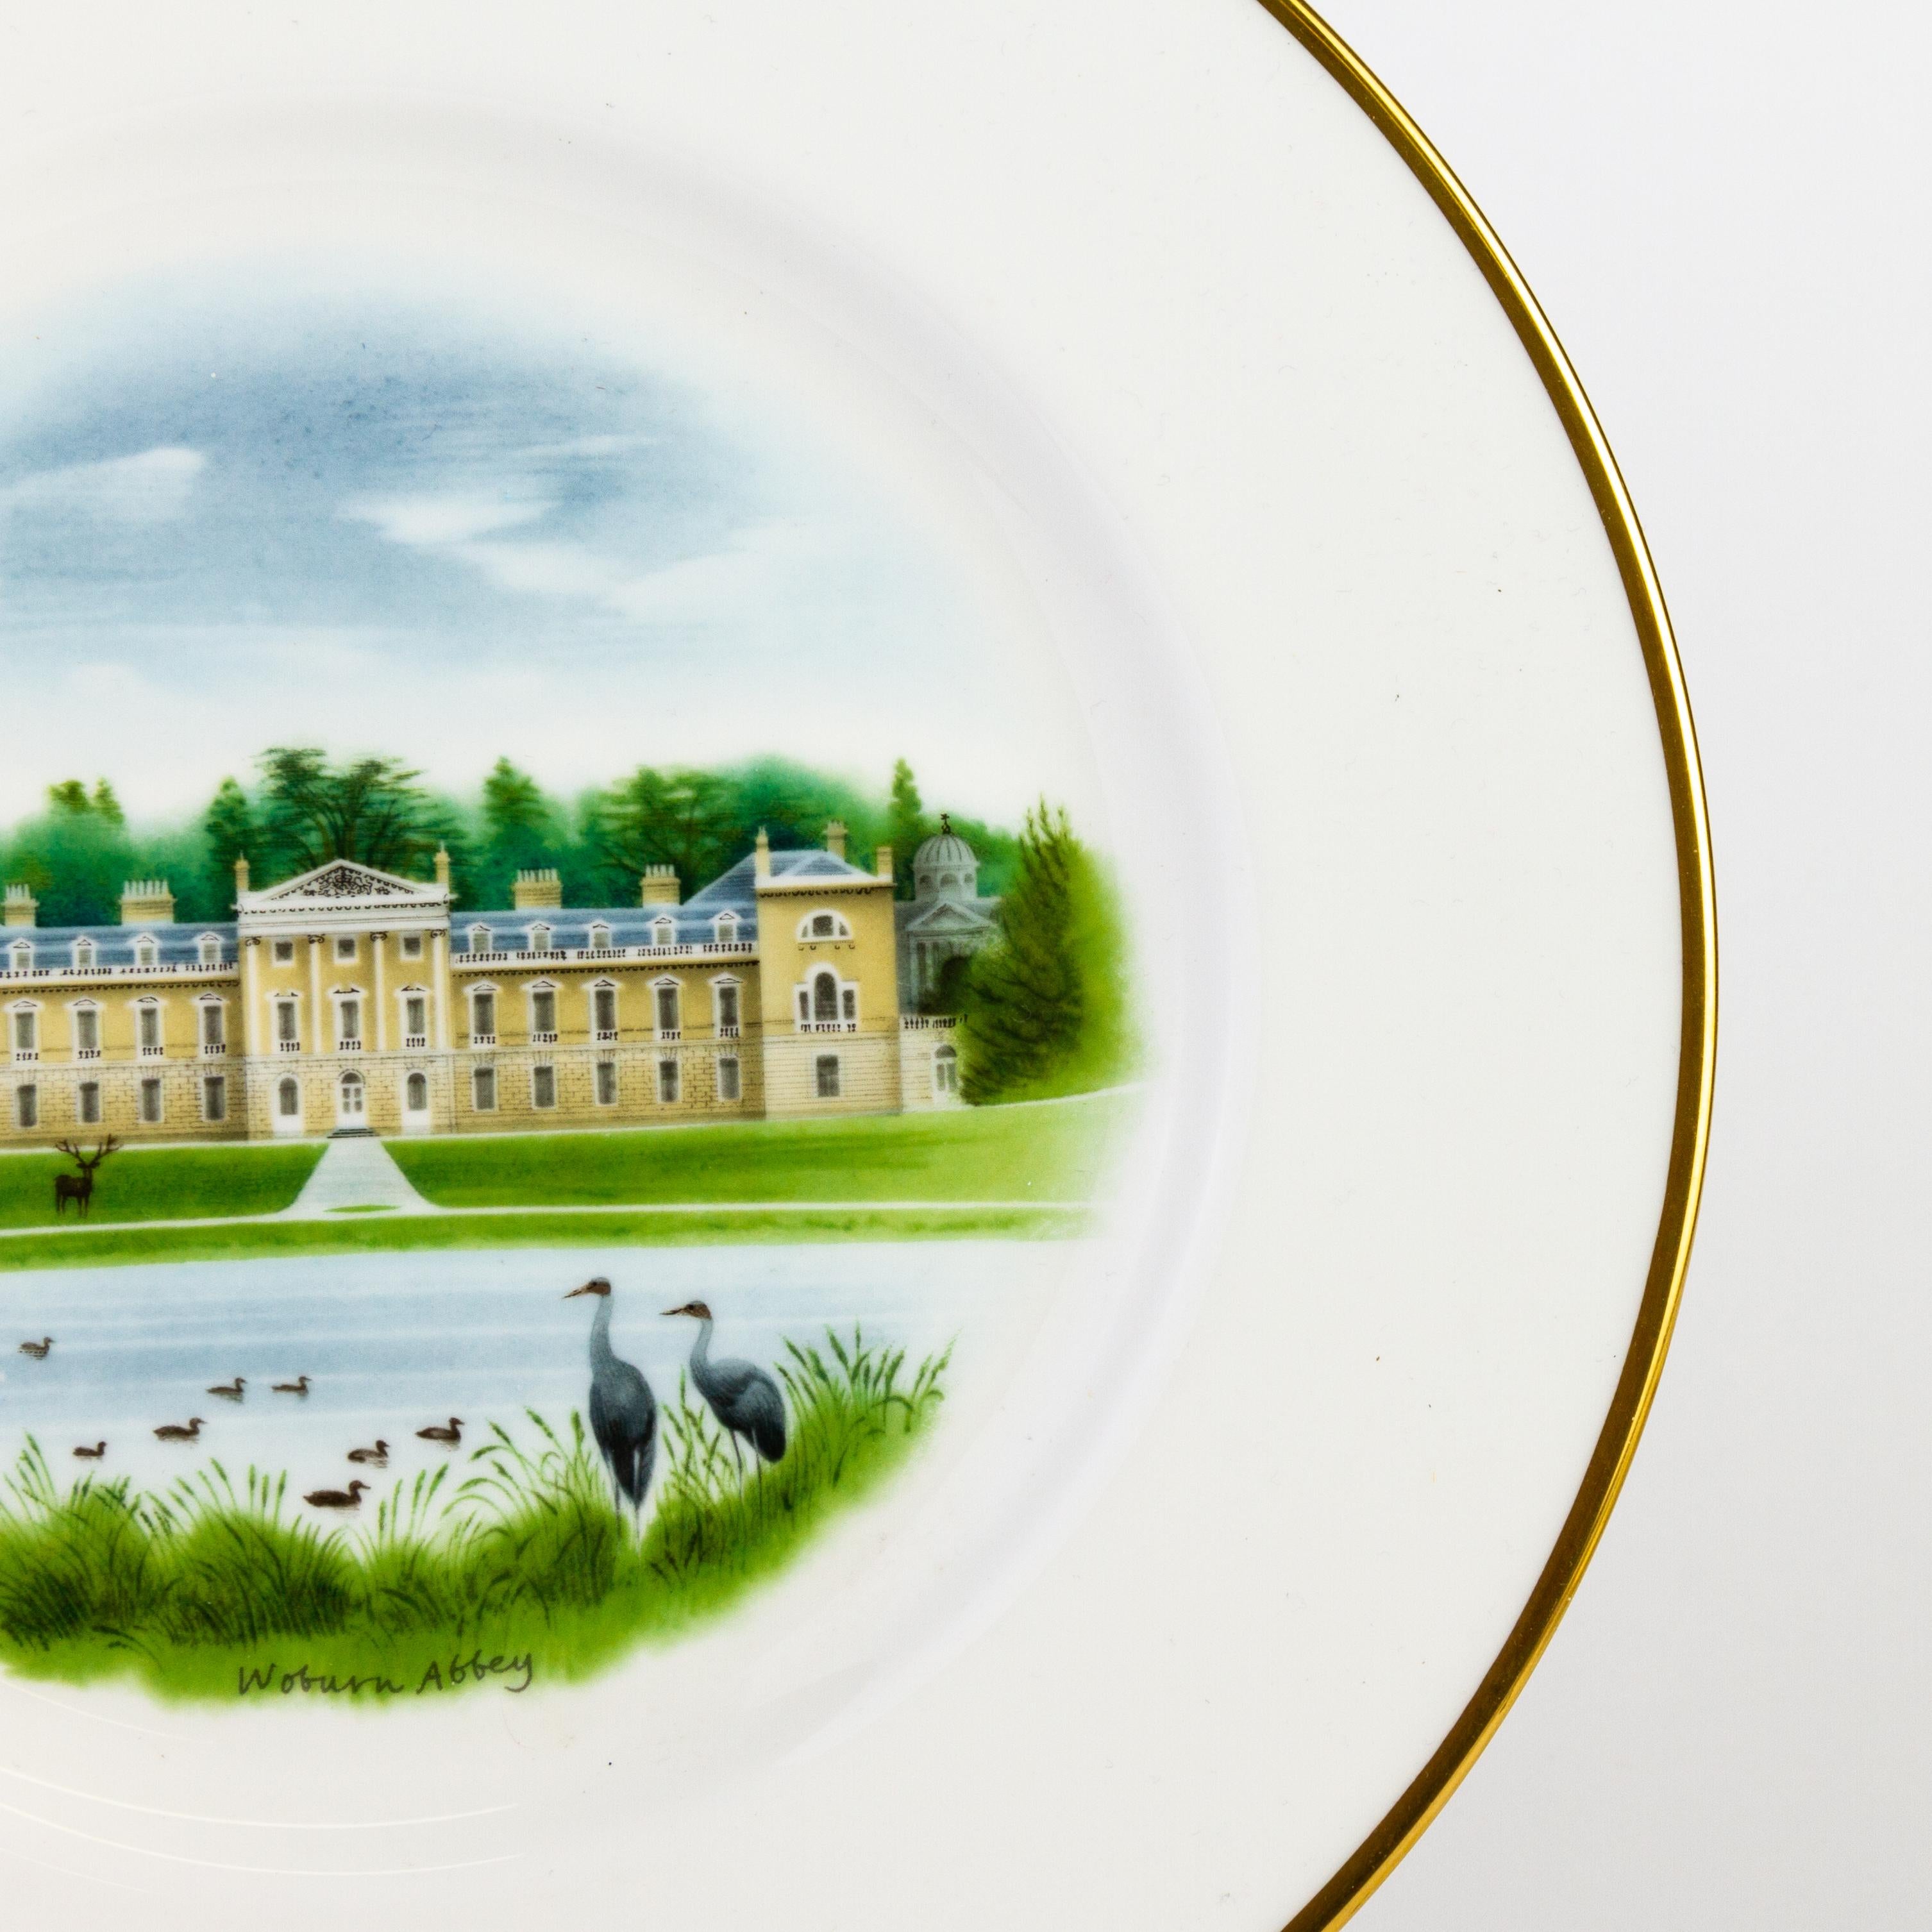 20th Century Wedgwood Fine English Porcelain Plate Depicting Woburn Abbey For Sale